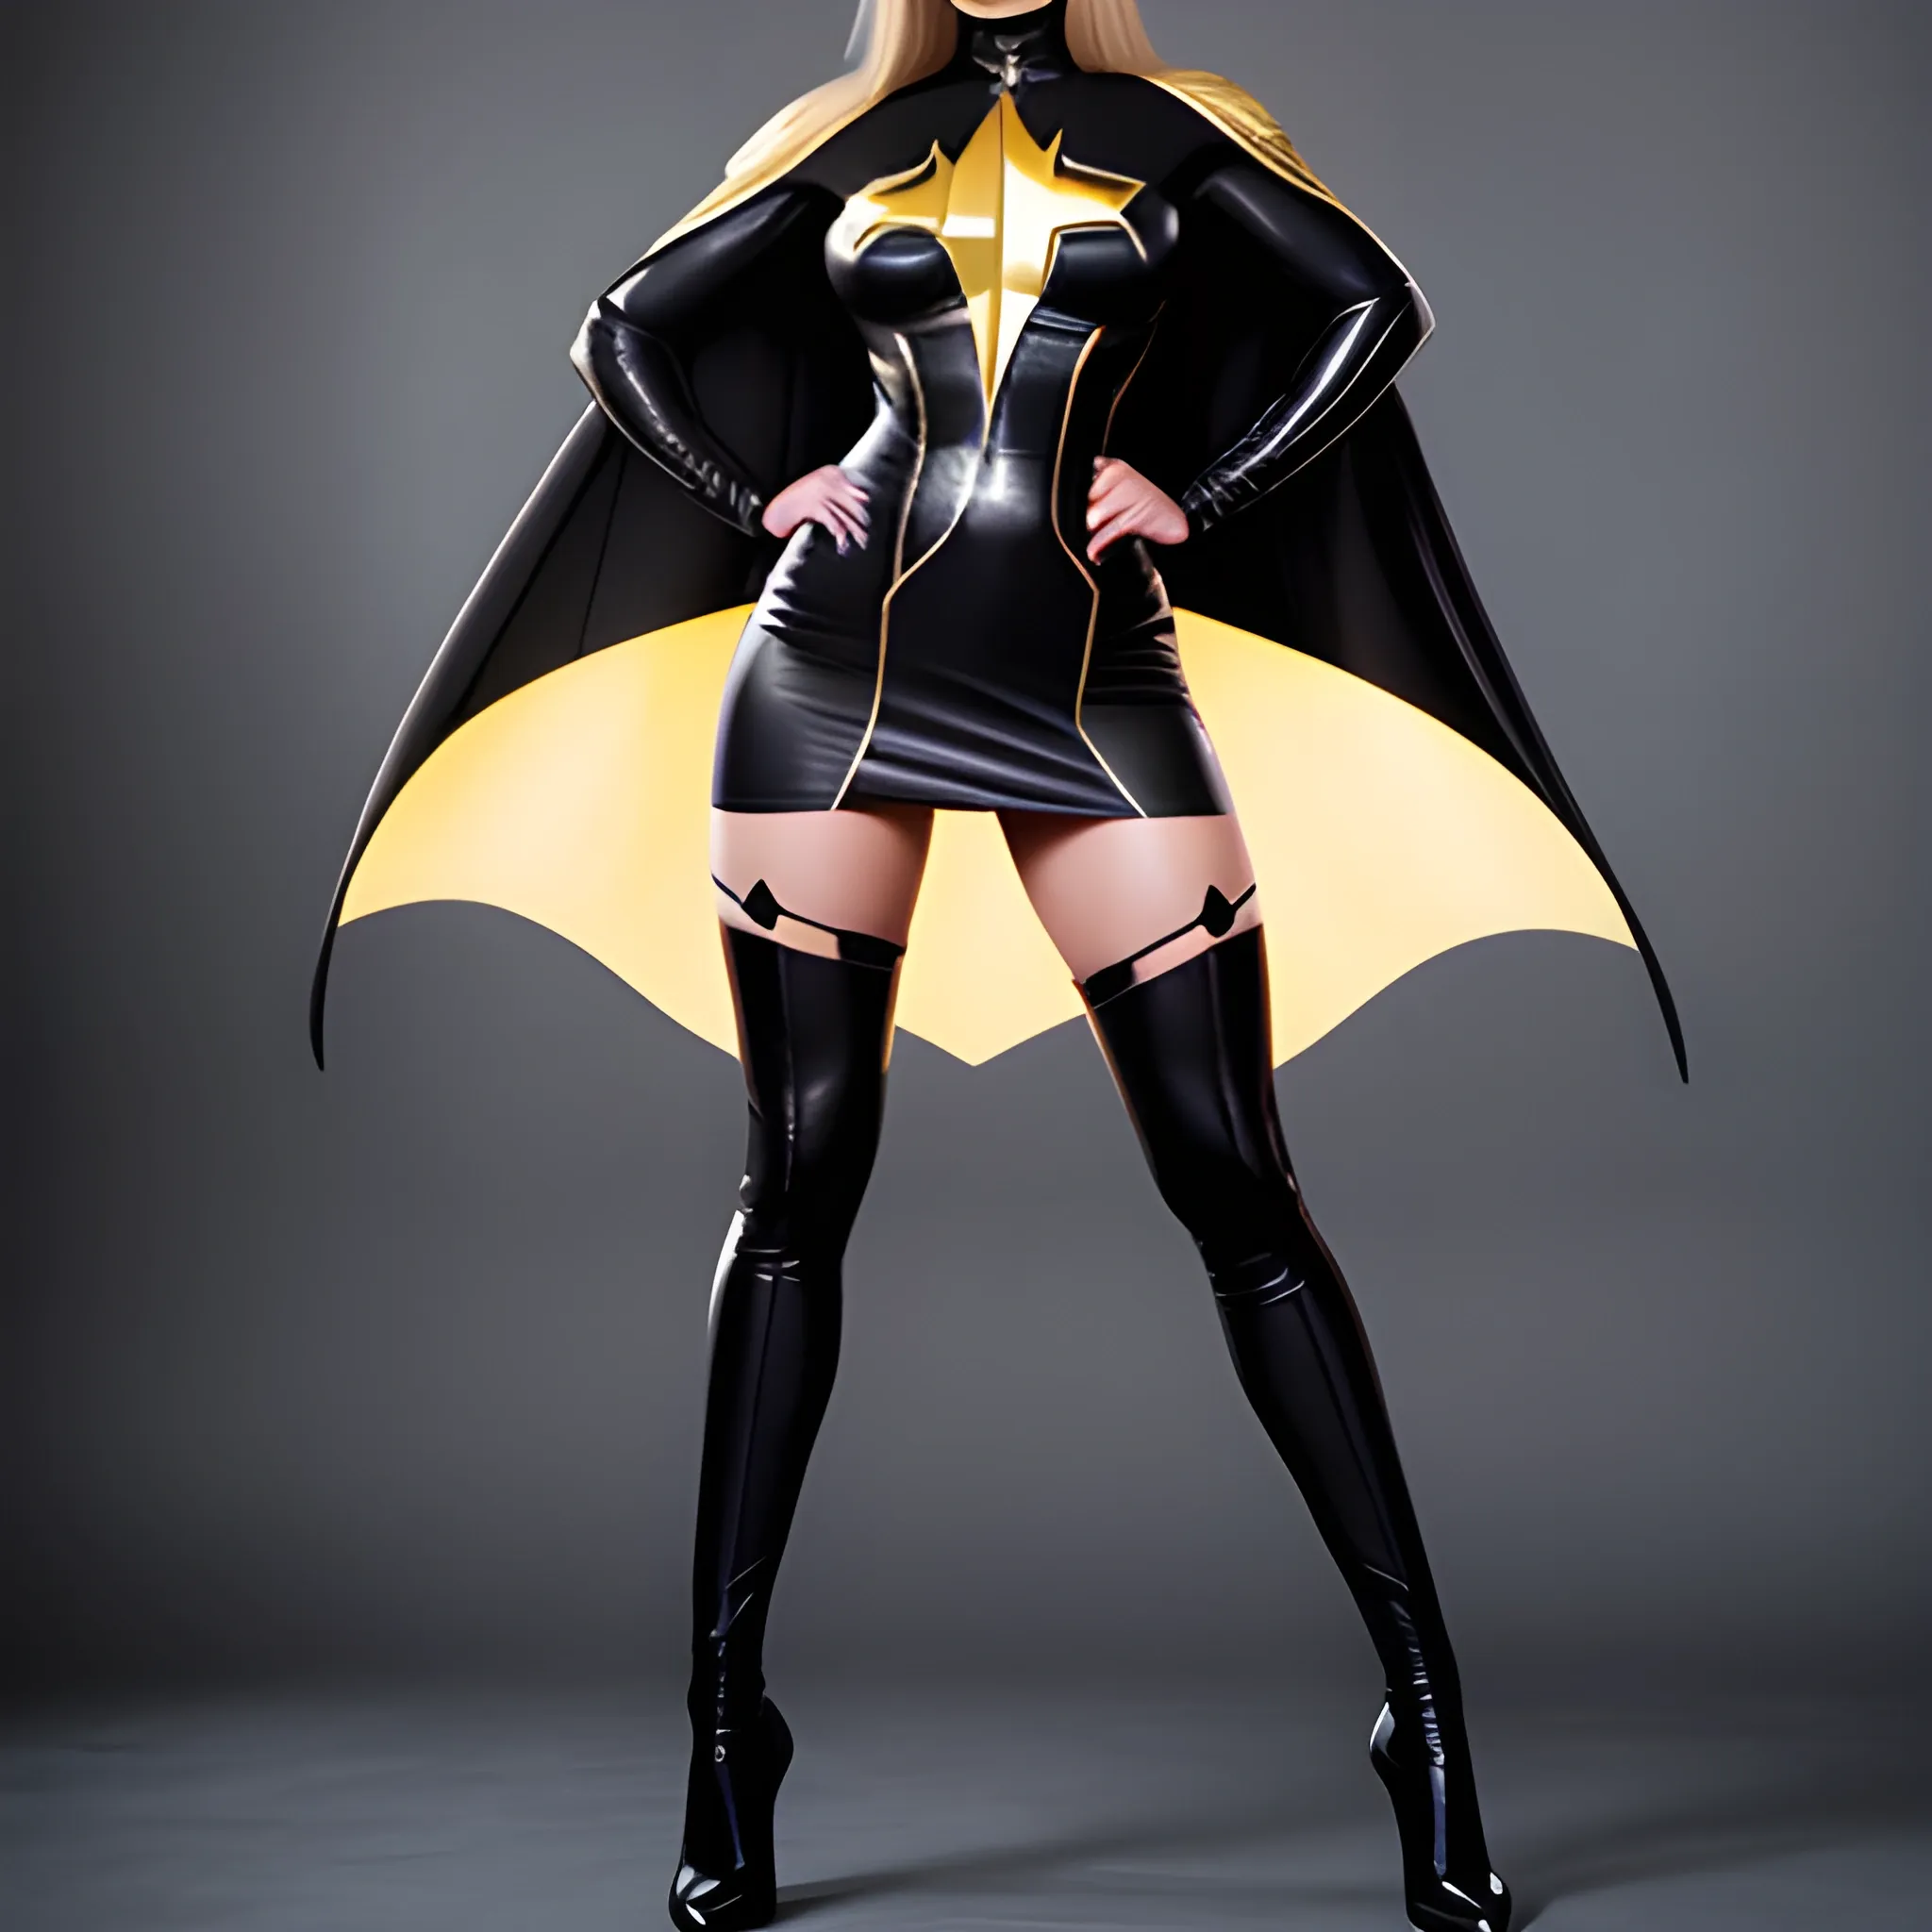 Sexy woman wearing a black Adam suit, similar to Margot Robbie face, full body, wearing a miniskirt, black cape, real human appearance, 